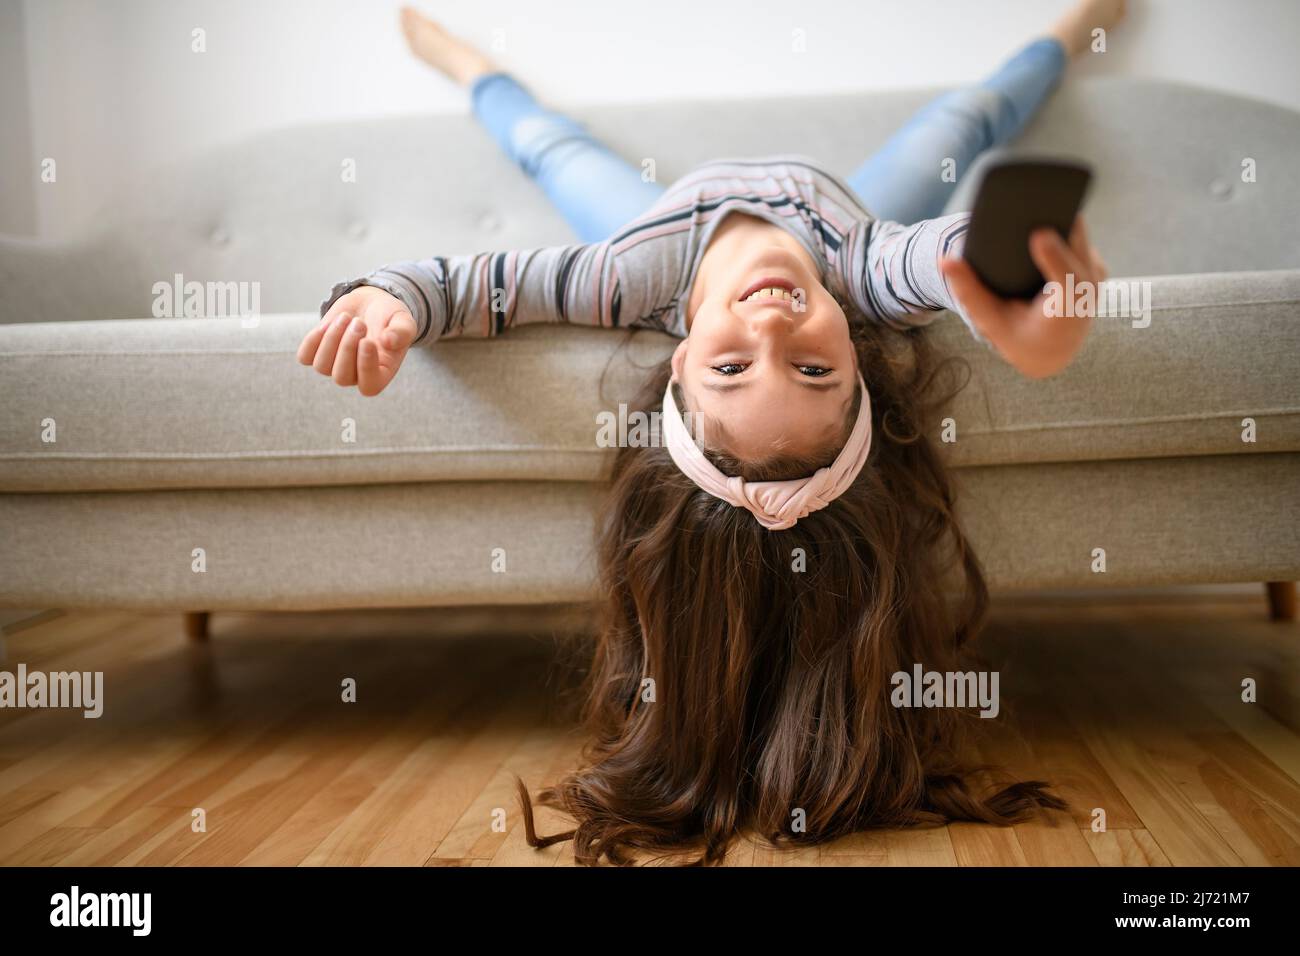 Girl Changing Channel With Remote Control In Front Of Television At Home upside down Stock Photo